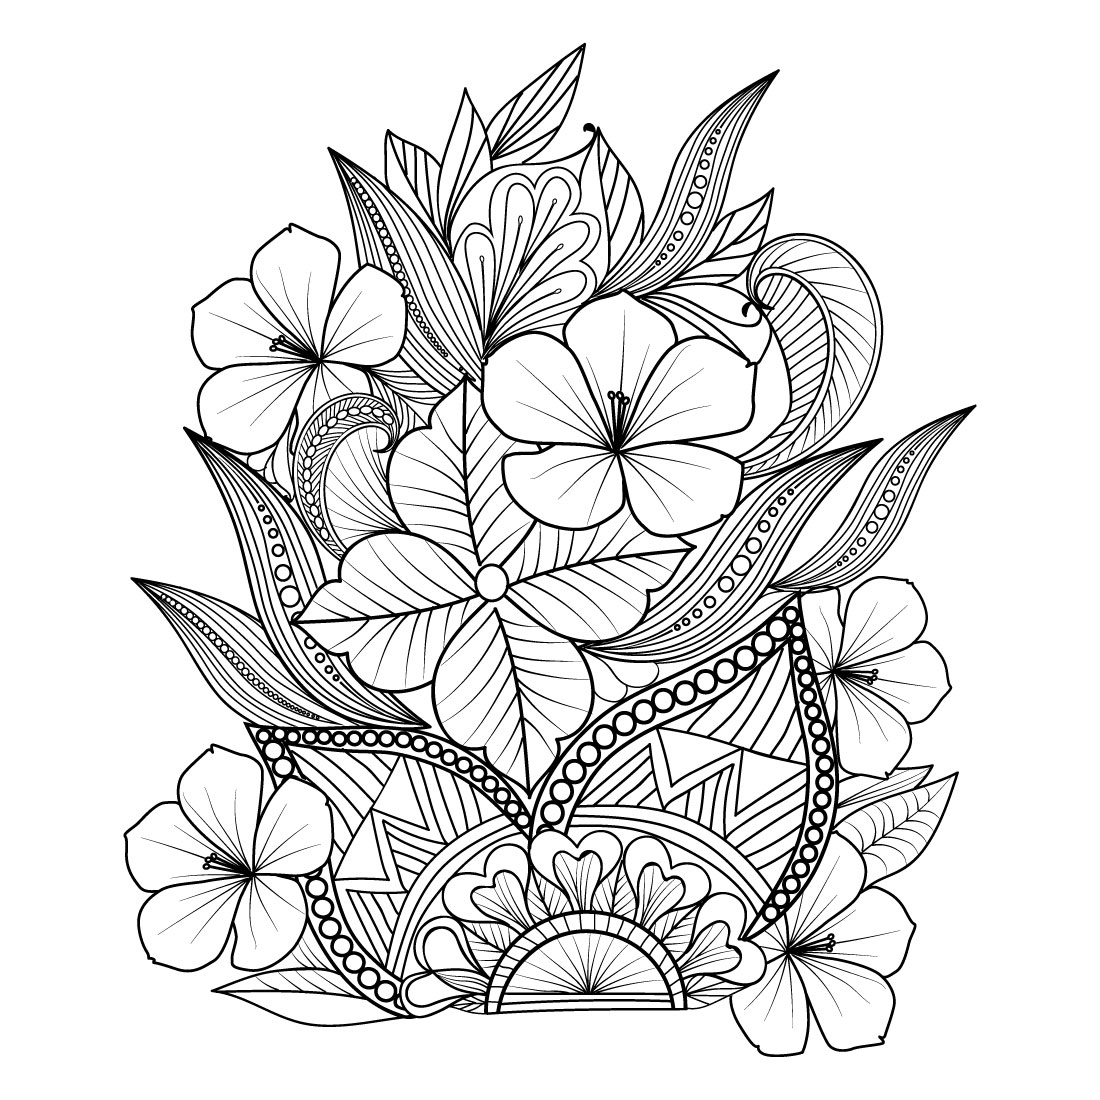 Black and white drawing of flowers.